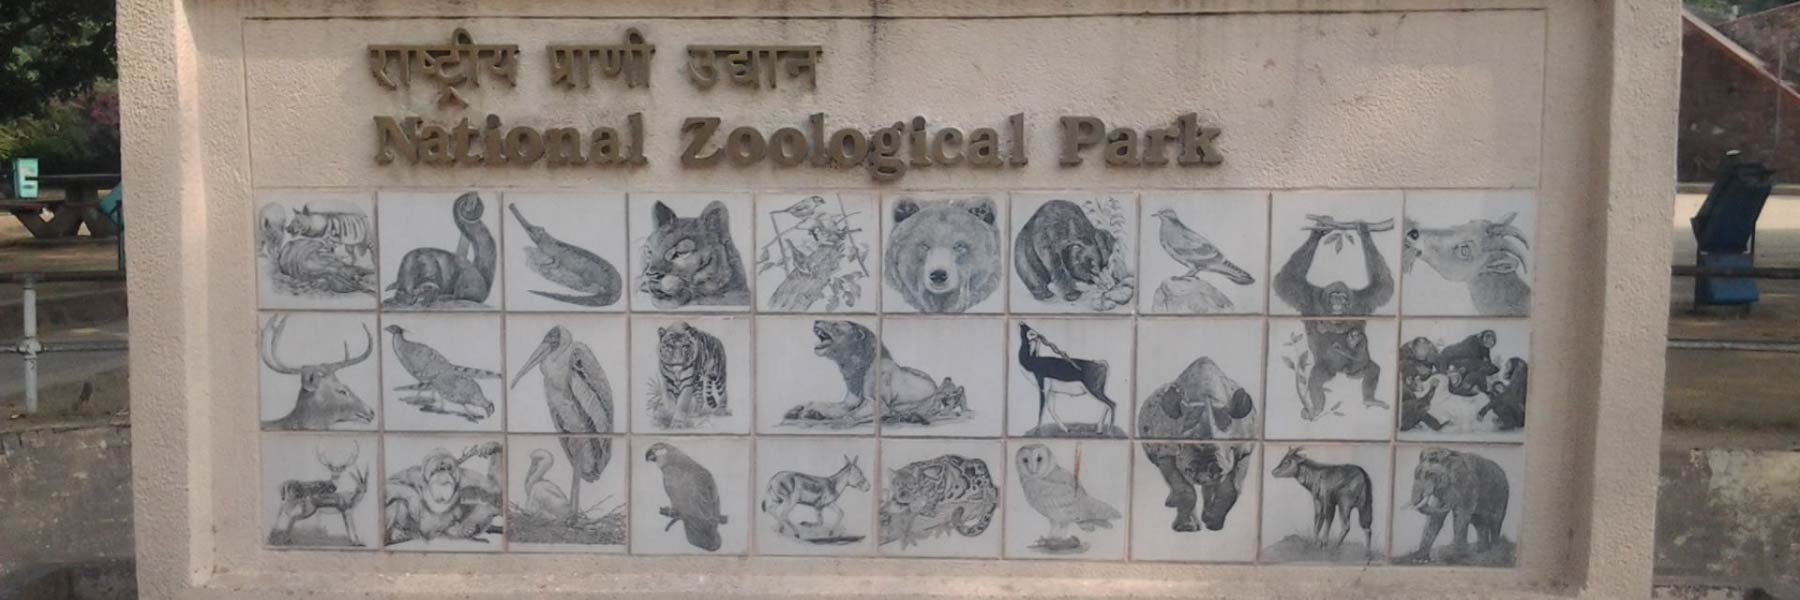 National Zoological Park | Incredible India